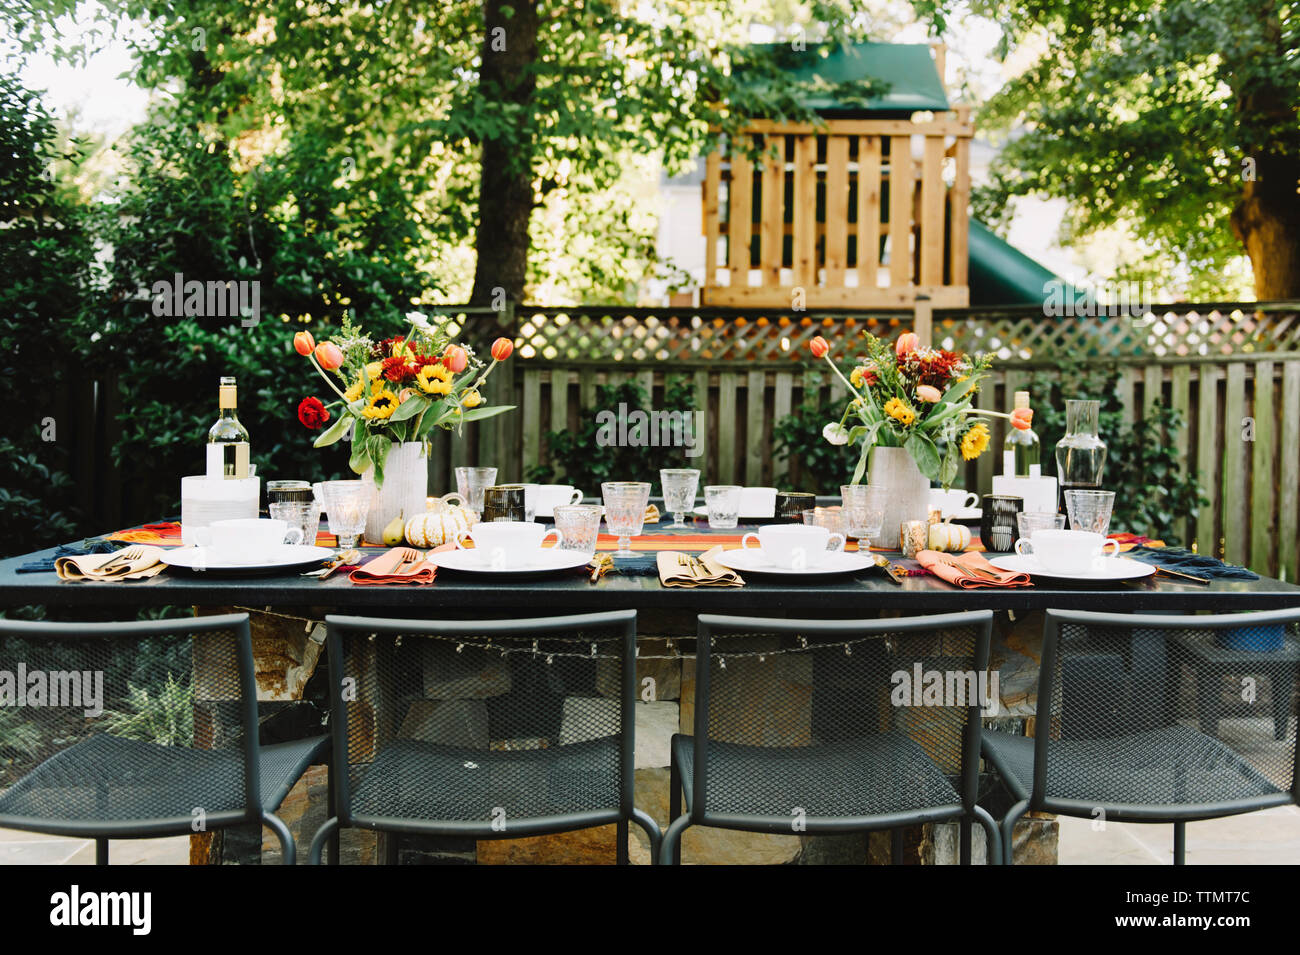 Place setting with empty chairs in backyard Stock Photo